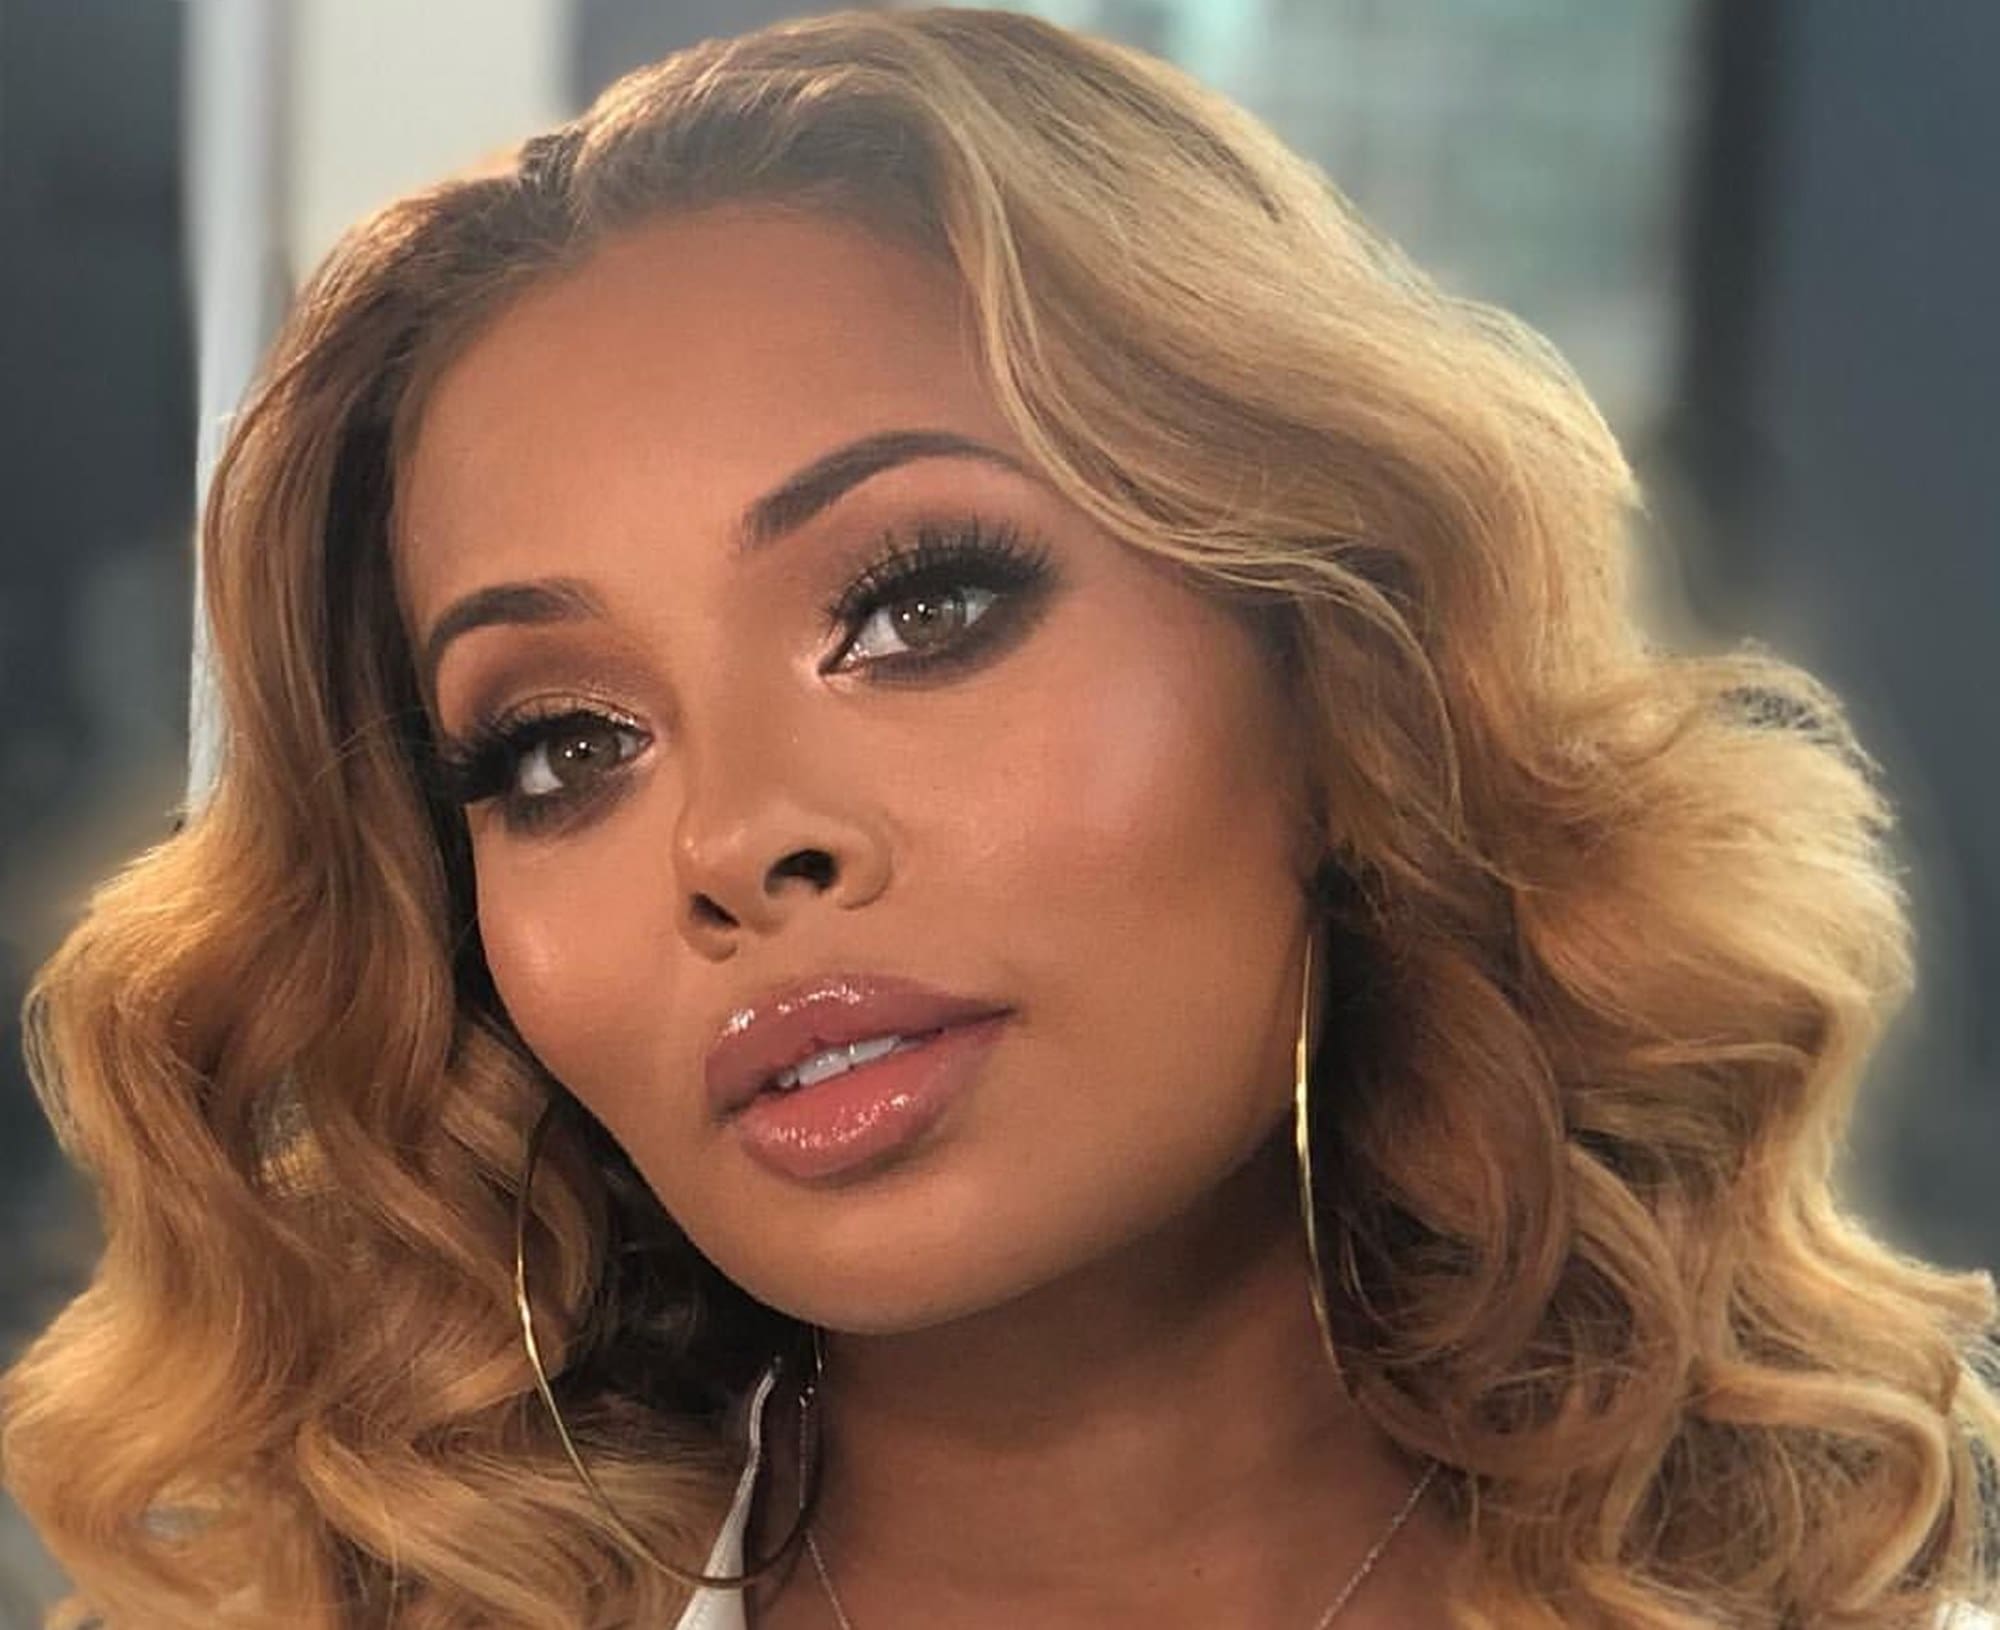 Eva Marcille's Mood Makes Fans' Day - See The Video